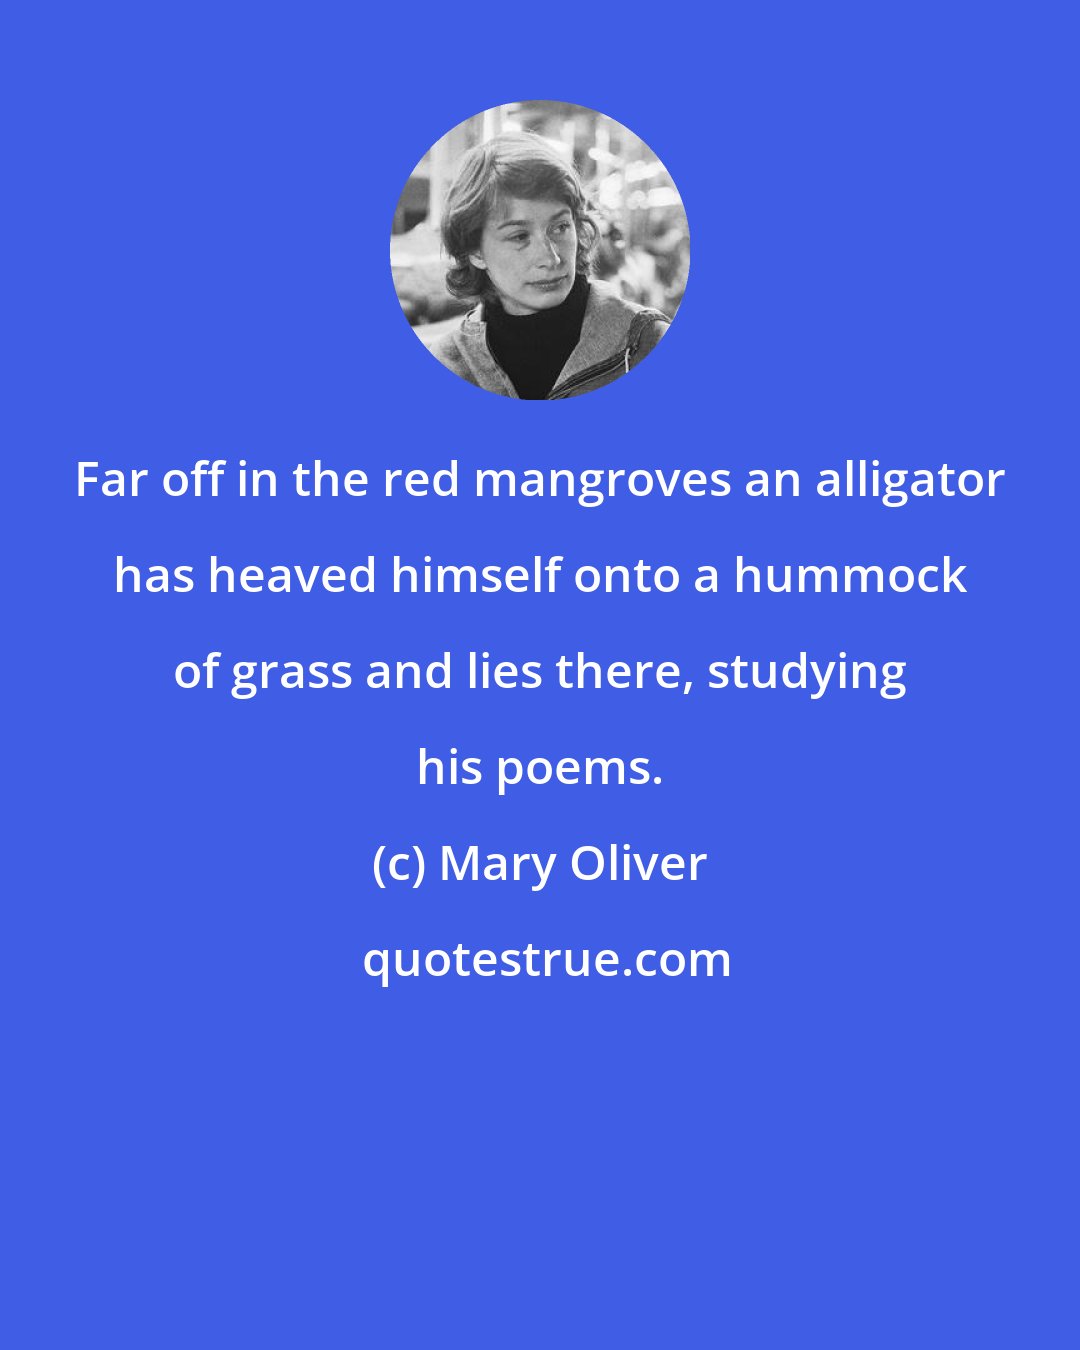 Mary Oliver: Far off in the red mangroves an alligator has heaved himself onto a hummock of grass and lies there, studying his poems.